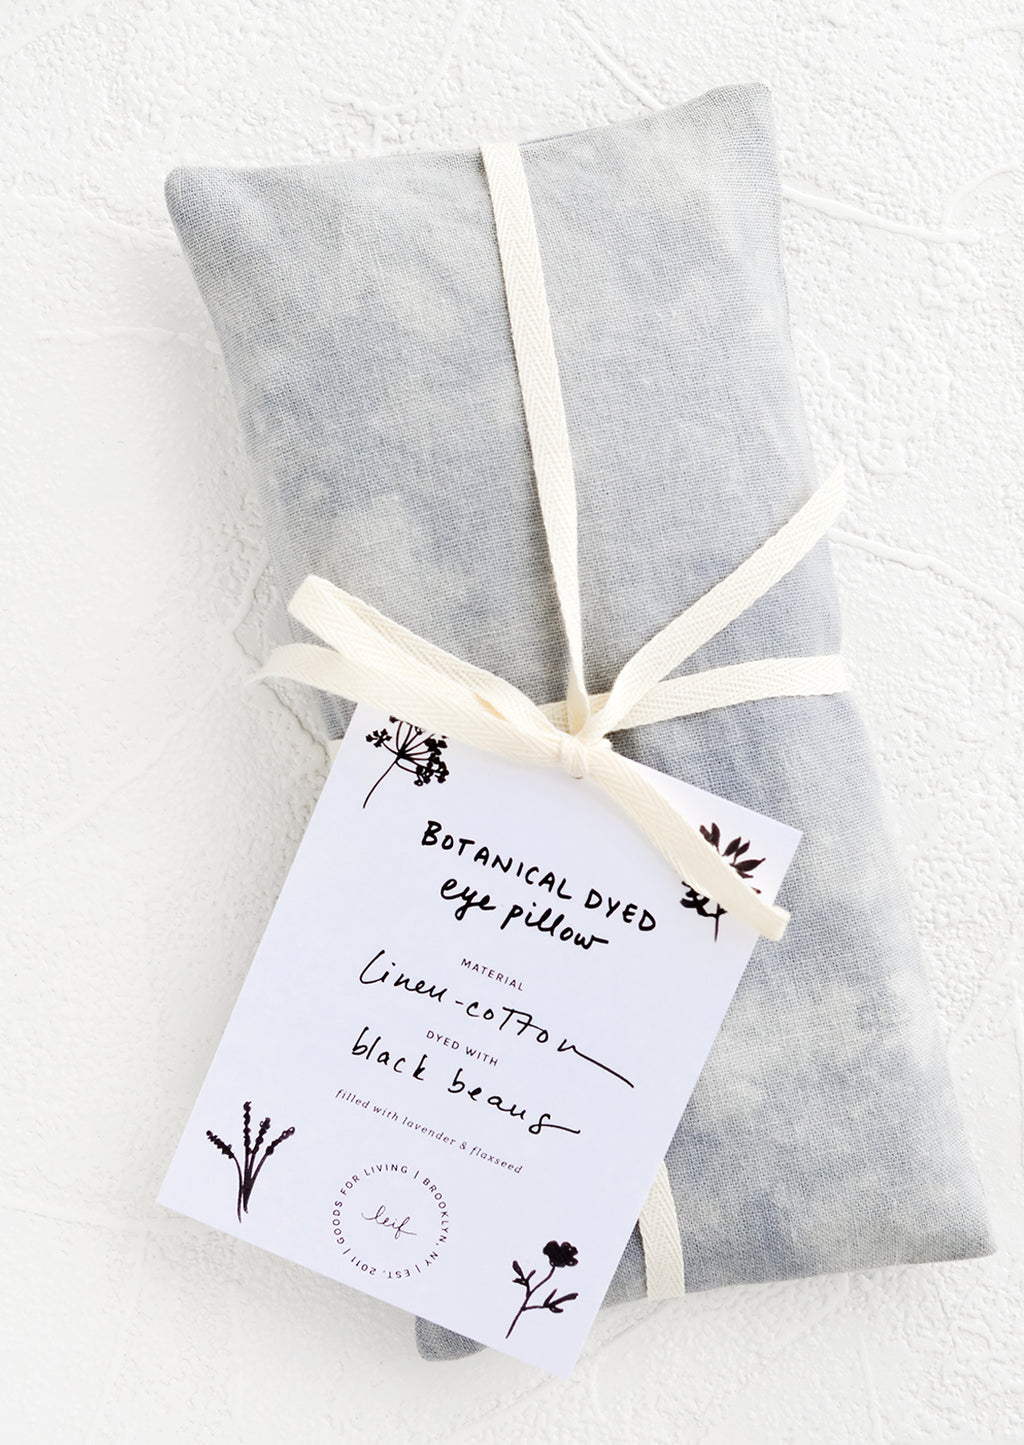 Black Bean: A naturally dyed relaxation eye pillow in blue-grey color dyed using black beans.